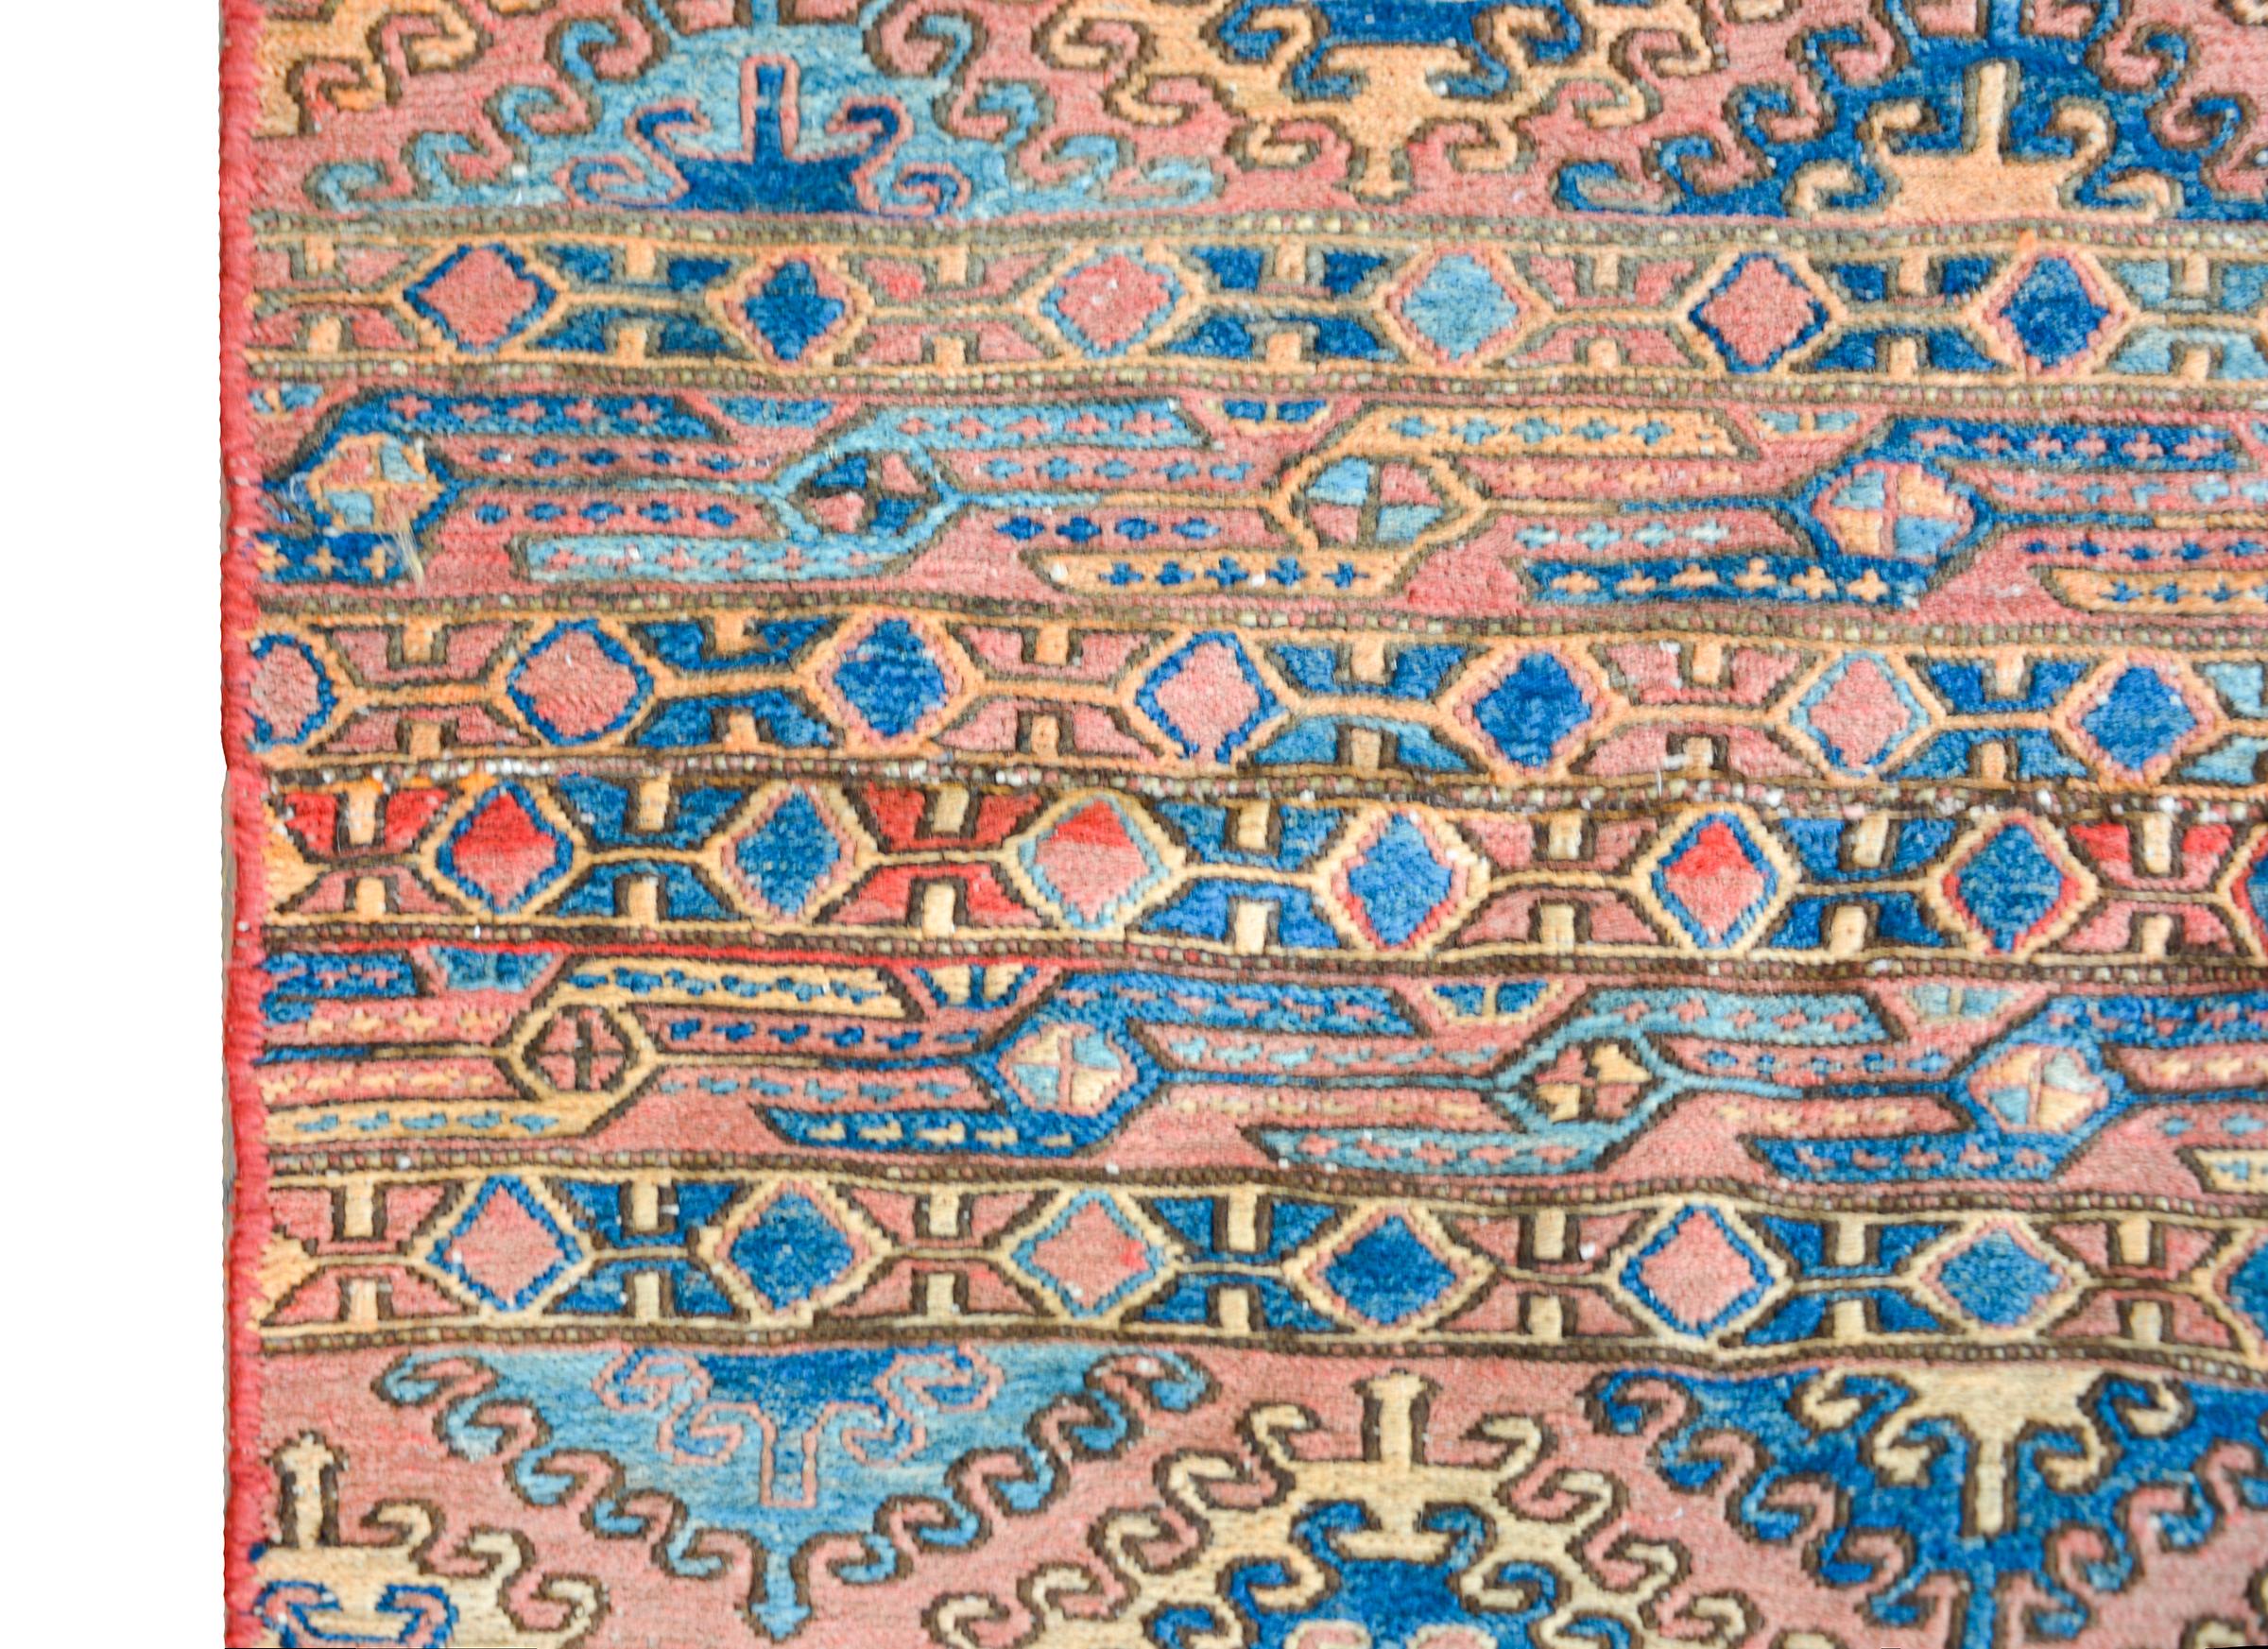 An interesting early 20th century Persian Soumak rug with bold stripes woven with stylized floral patterns, and flanked with white flat woven ends.